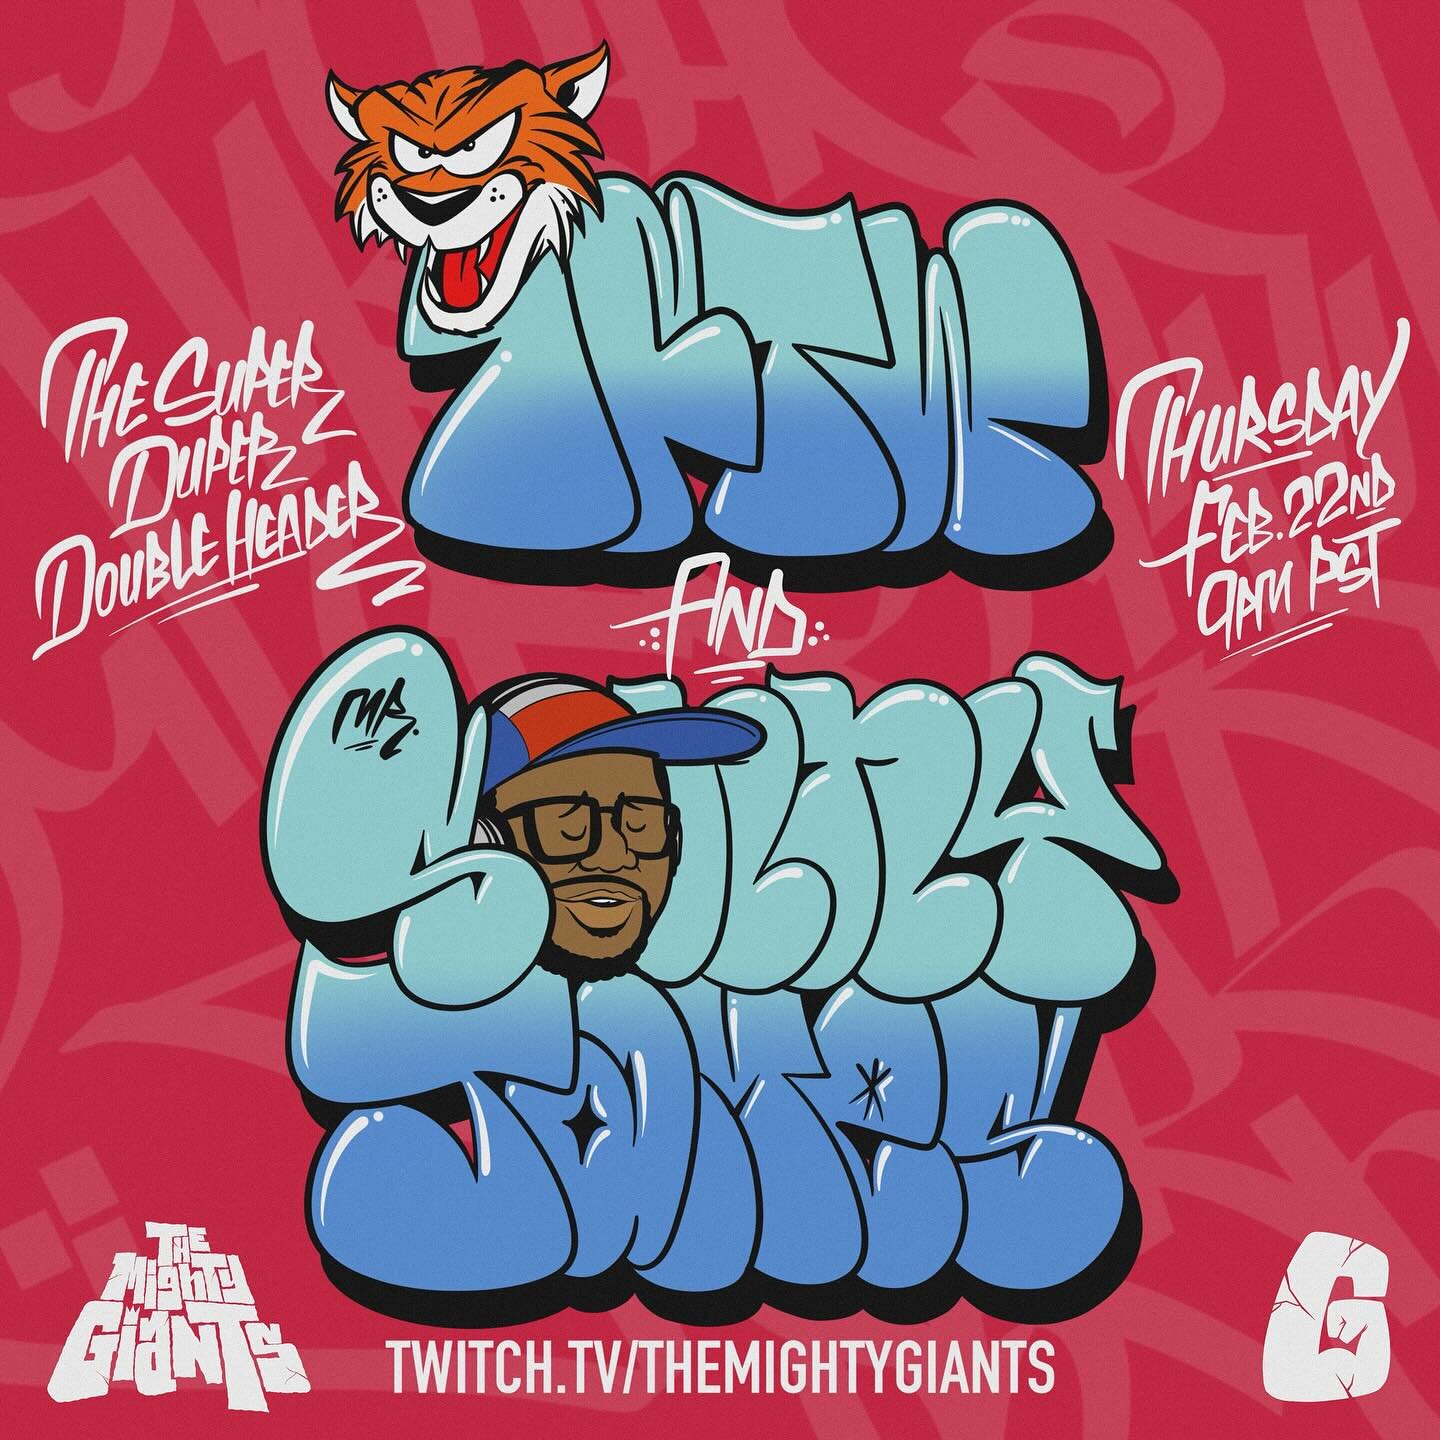 Tonight I&rsquo;m getting down with my brother in bikes &amp; music, @iftw and @itsthemightygiants on Twitch at 9pm PT. It&rsquo;s been a while since I&rsquo;ve had the chance to livestream so this is going to be special. Tune in and get emojinal in 